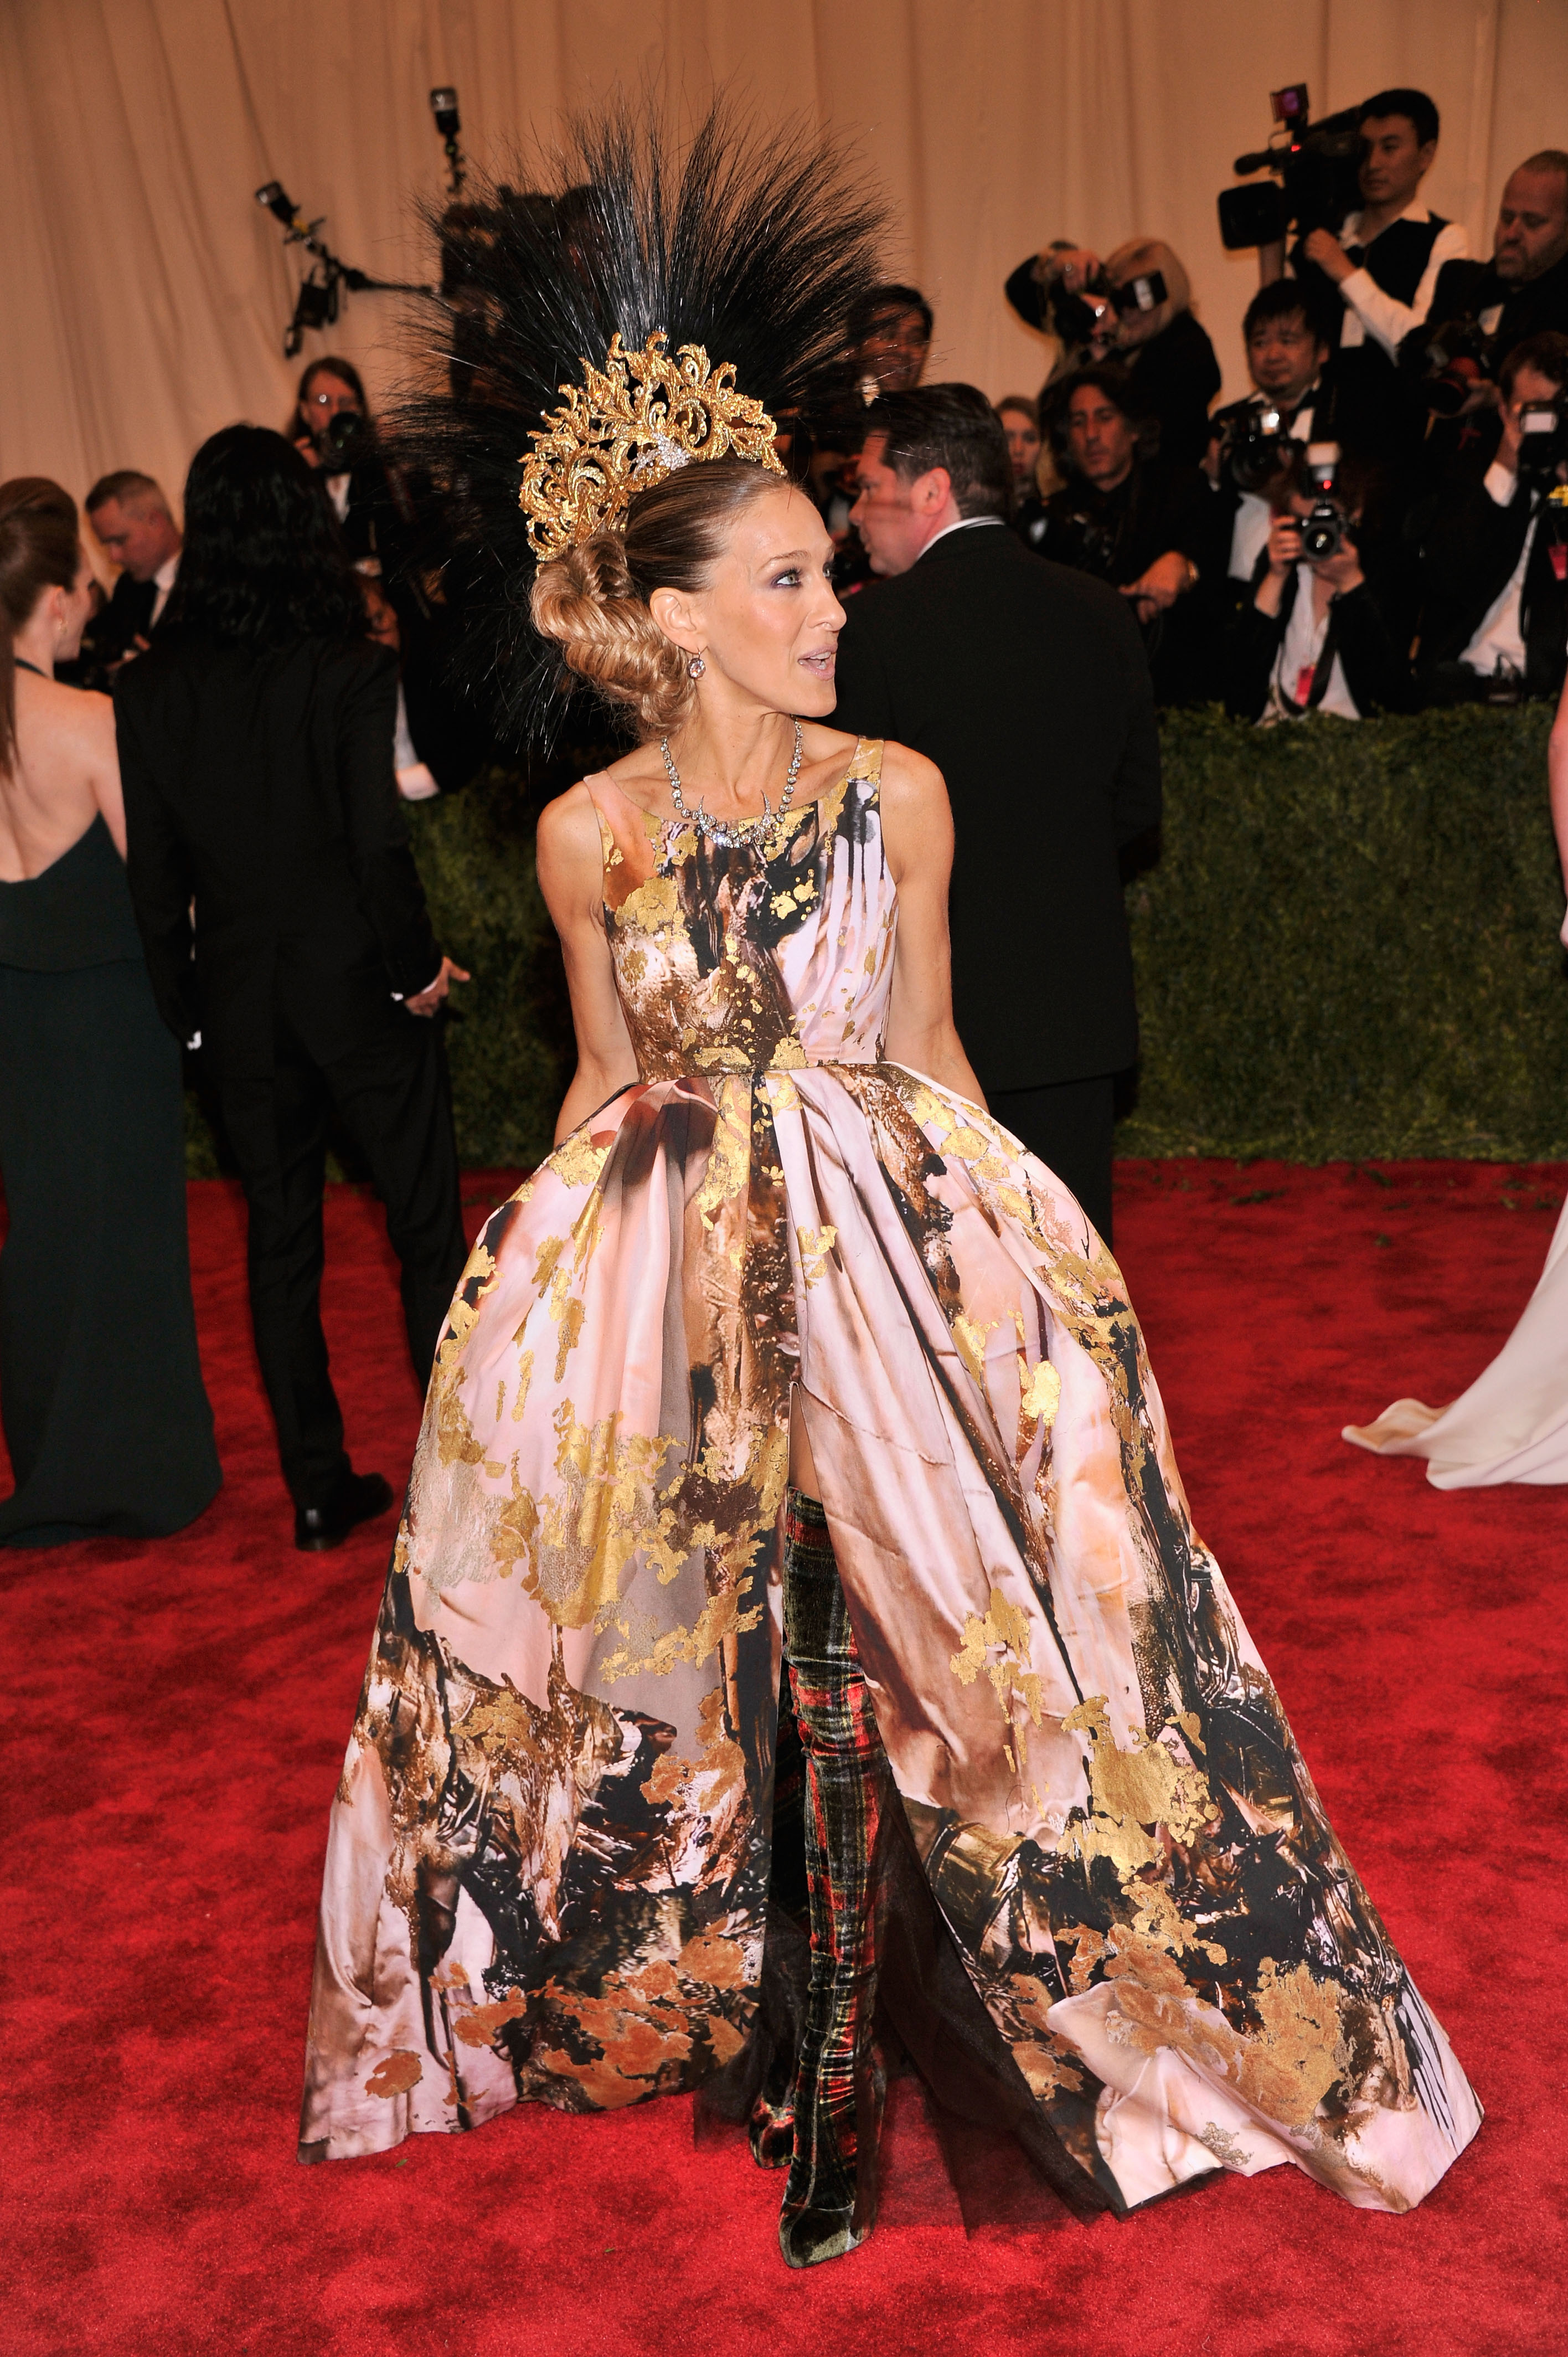 Sarah Jessica Parker besucht die Met Gala mit dem Thema "PUNK: Chaos to Couture" im Metropolitan Museum of Art am 6. Mai 2013 in New York City. | Quelle: Getty Images